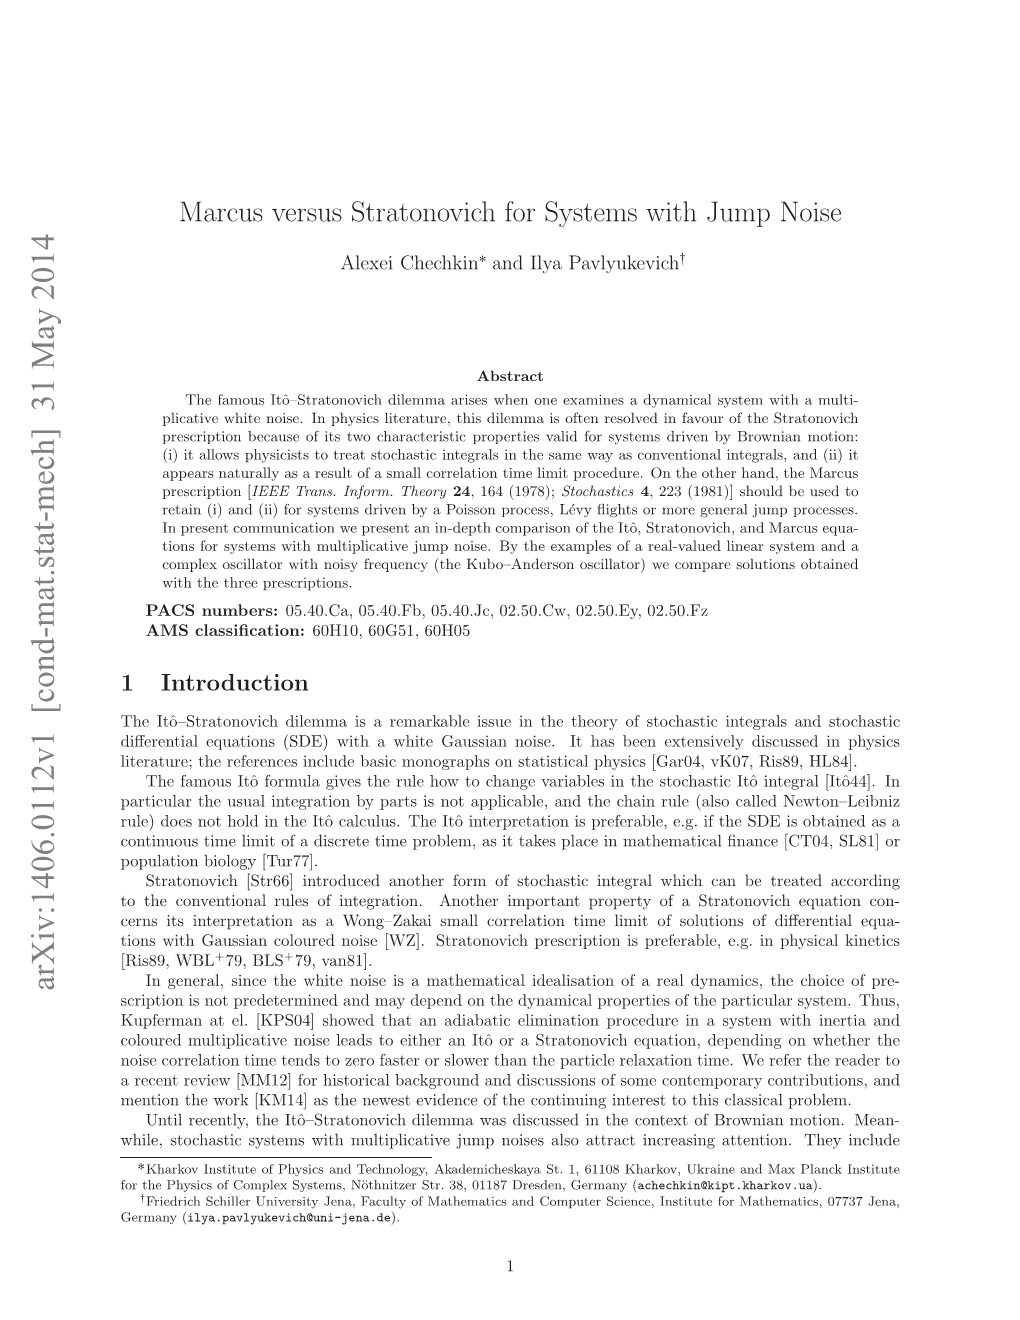 Marcus Versus Stratonovich for Systems with Jump Noise